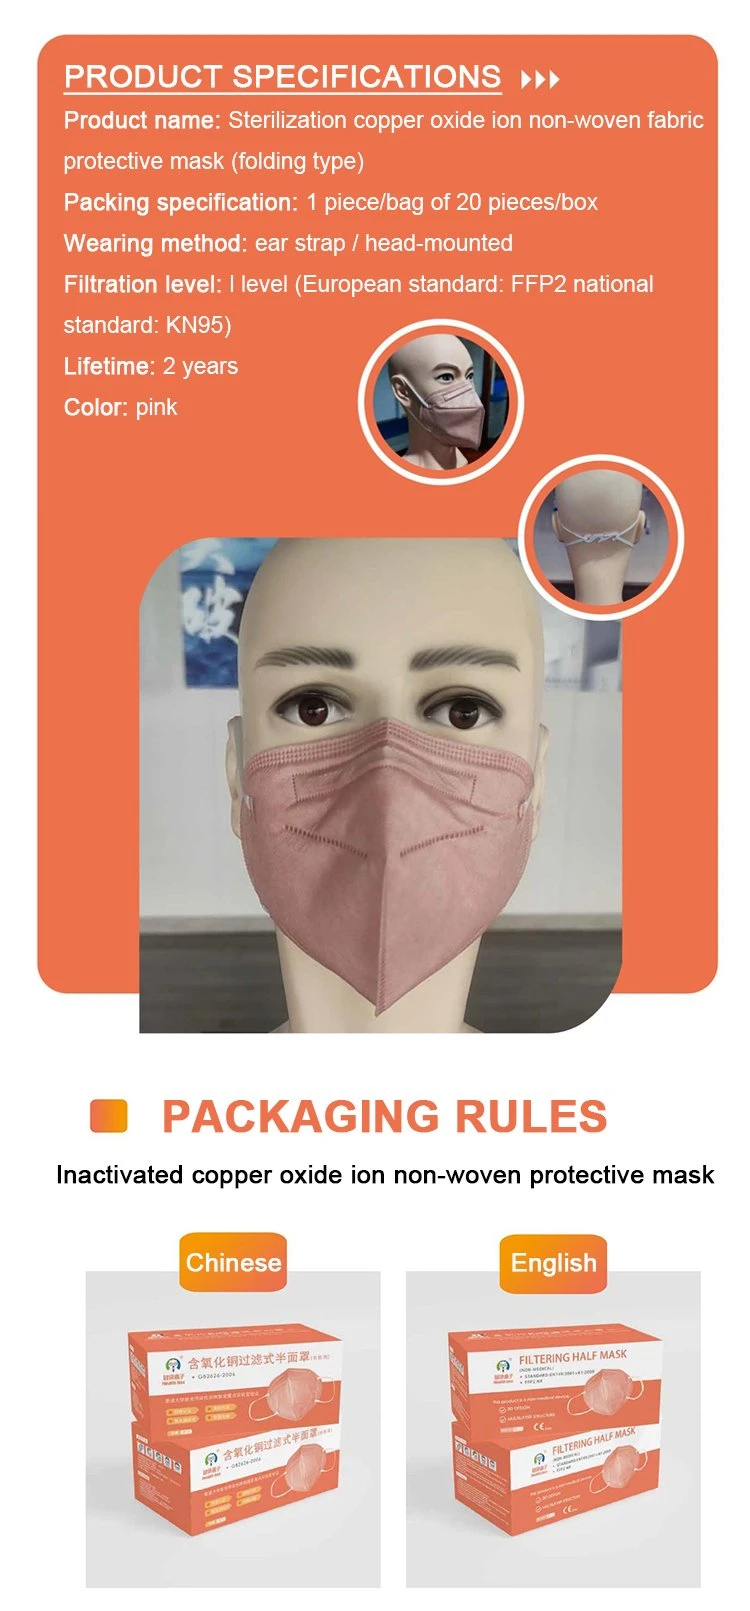 Unique Health Box Copper Oxide Filter Half Face Mask Reuse Melting Spray Cloth Non-Woven Dust and Fog Masks